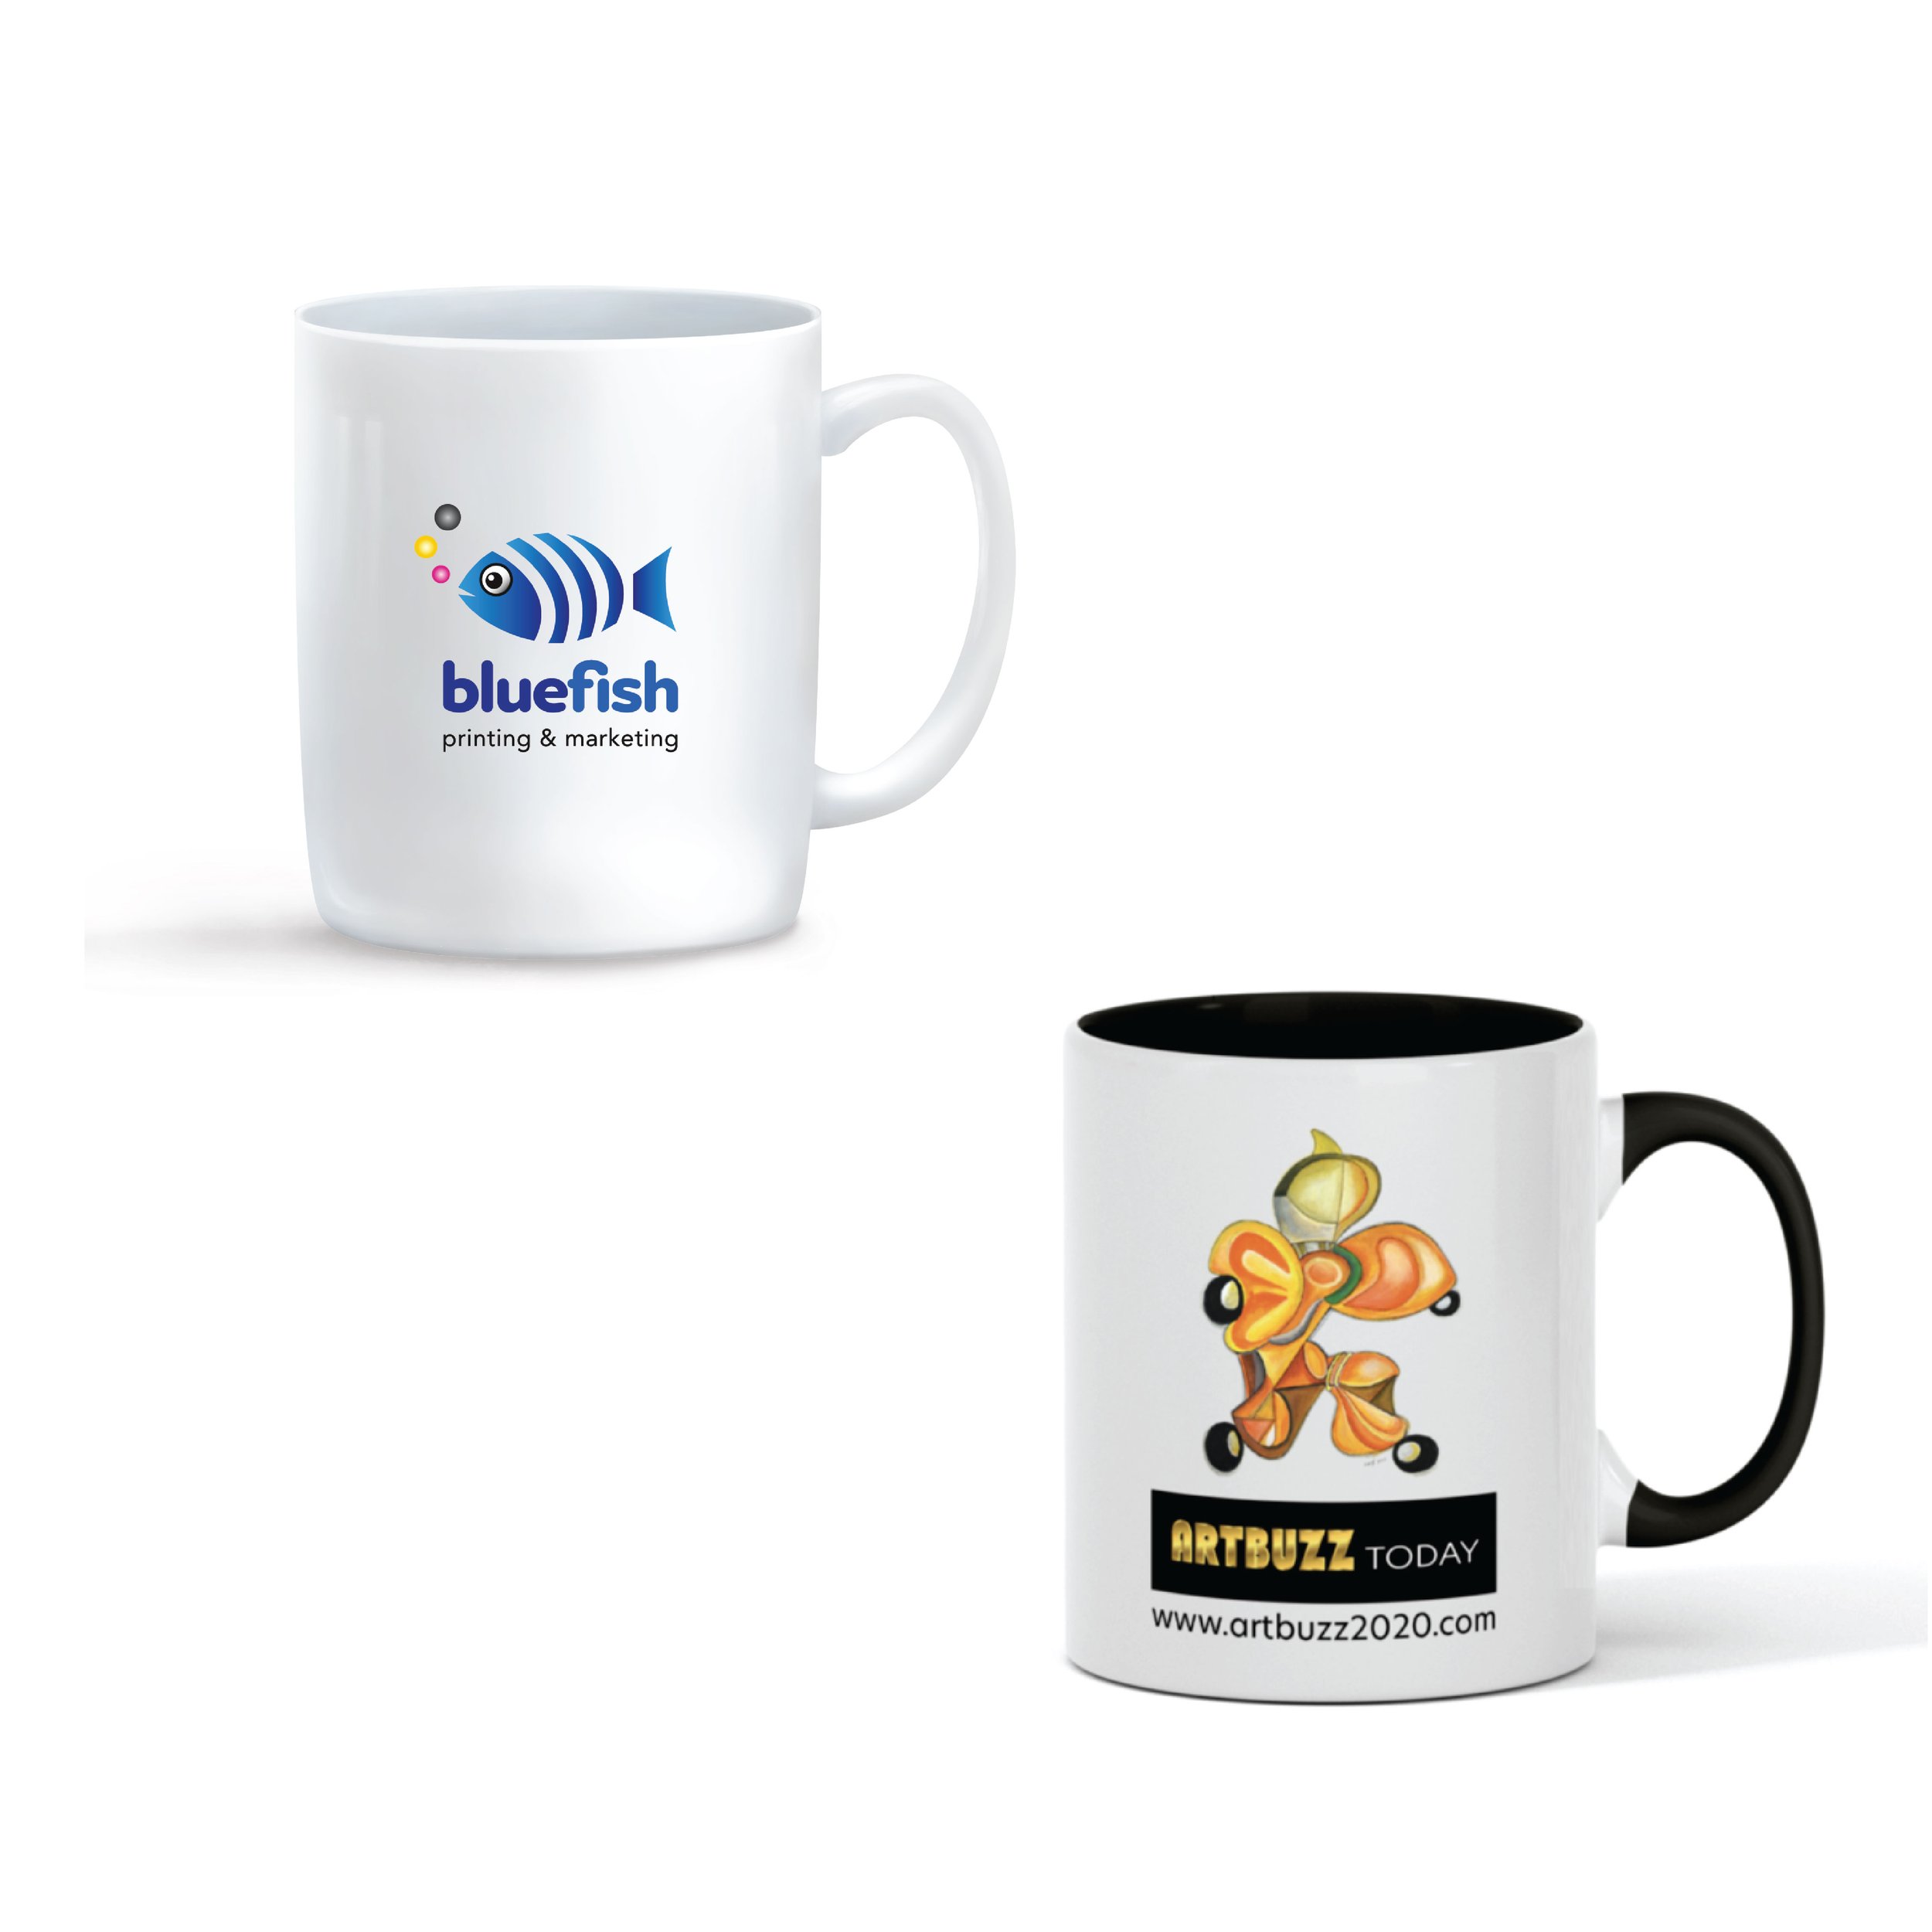 promo products-01.jpg